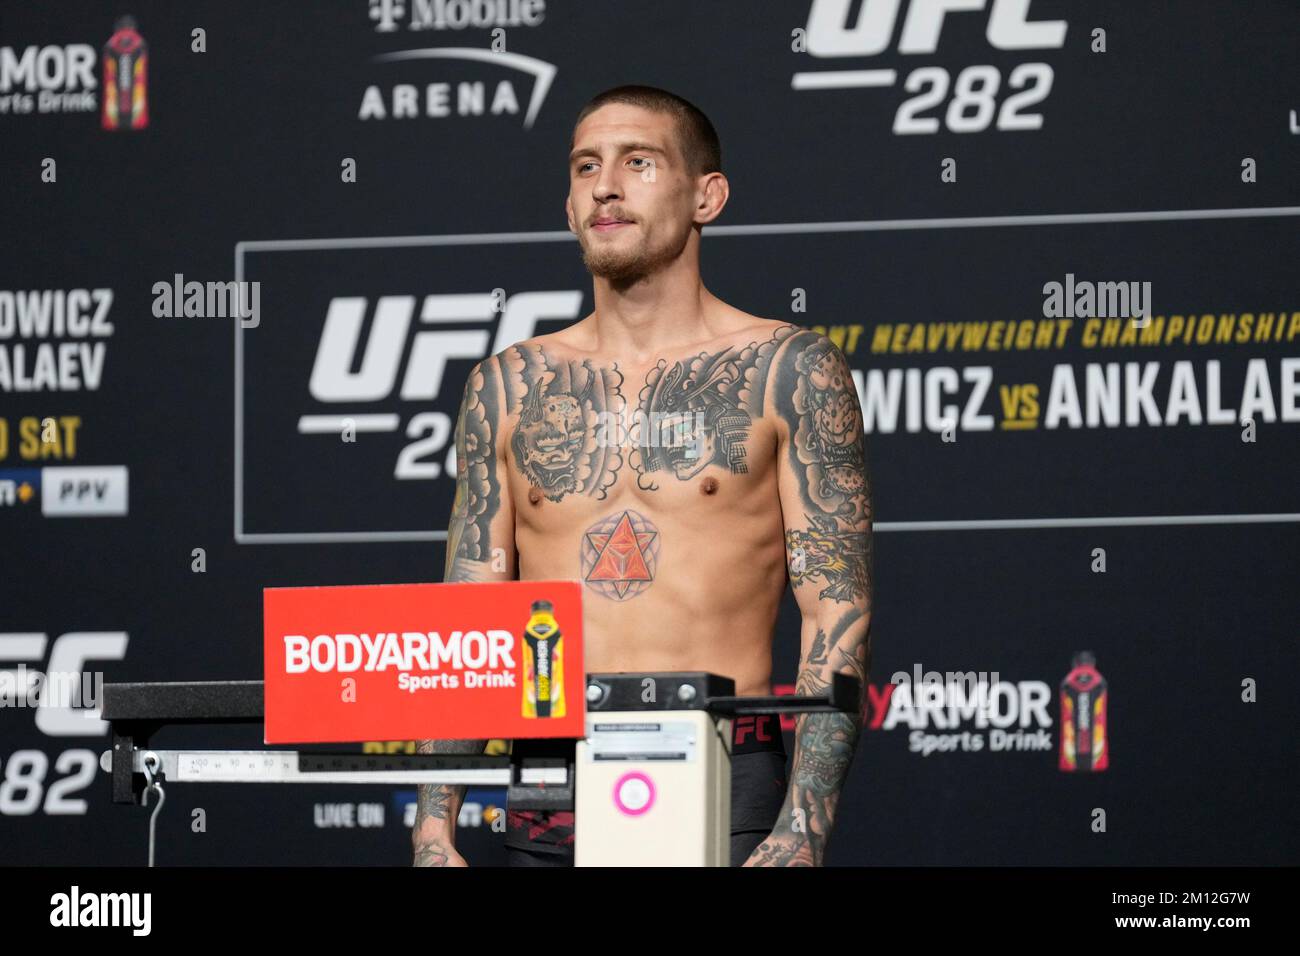 Las Vegas, USA. 09th Dec, 2022. December 9, 2022, Las Vegas, NV, LAS VEGAS, NEVADA, United States: LAS VEGAS, NV - December 9: Steven Koslow steps on the scale for the official weigh-in at UFC Apex for UFC 282 -Blachowicz vs Ankalaev : Official Weigh-ins on December 9, 2022 in Las Vegas, NV, United States. (Credit Image: © Louis Grasse/PX Imagens via ZUMA Press Wire) Credit: ZUMA Press, Inc./Alamy Live News Stock Photo